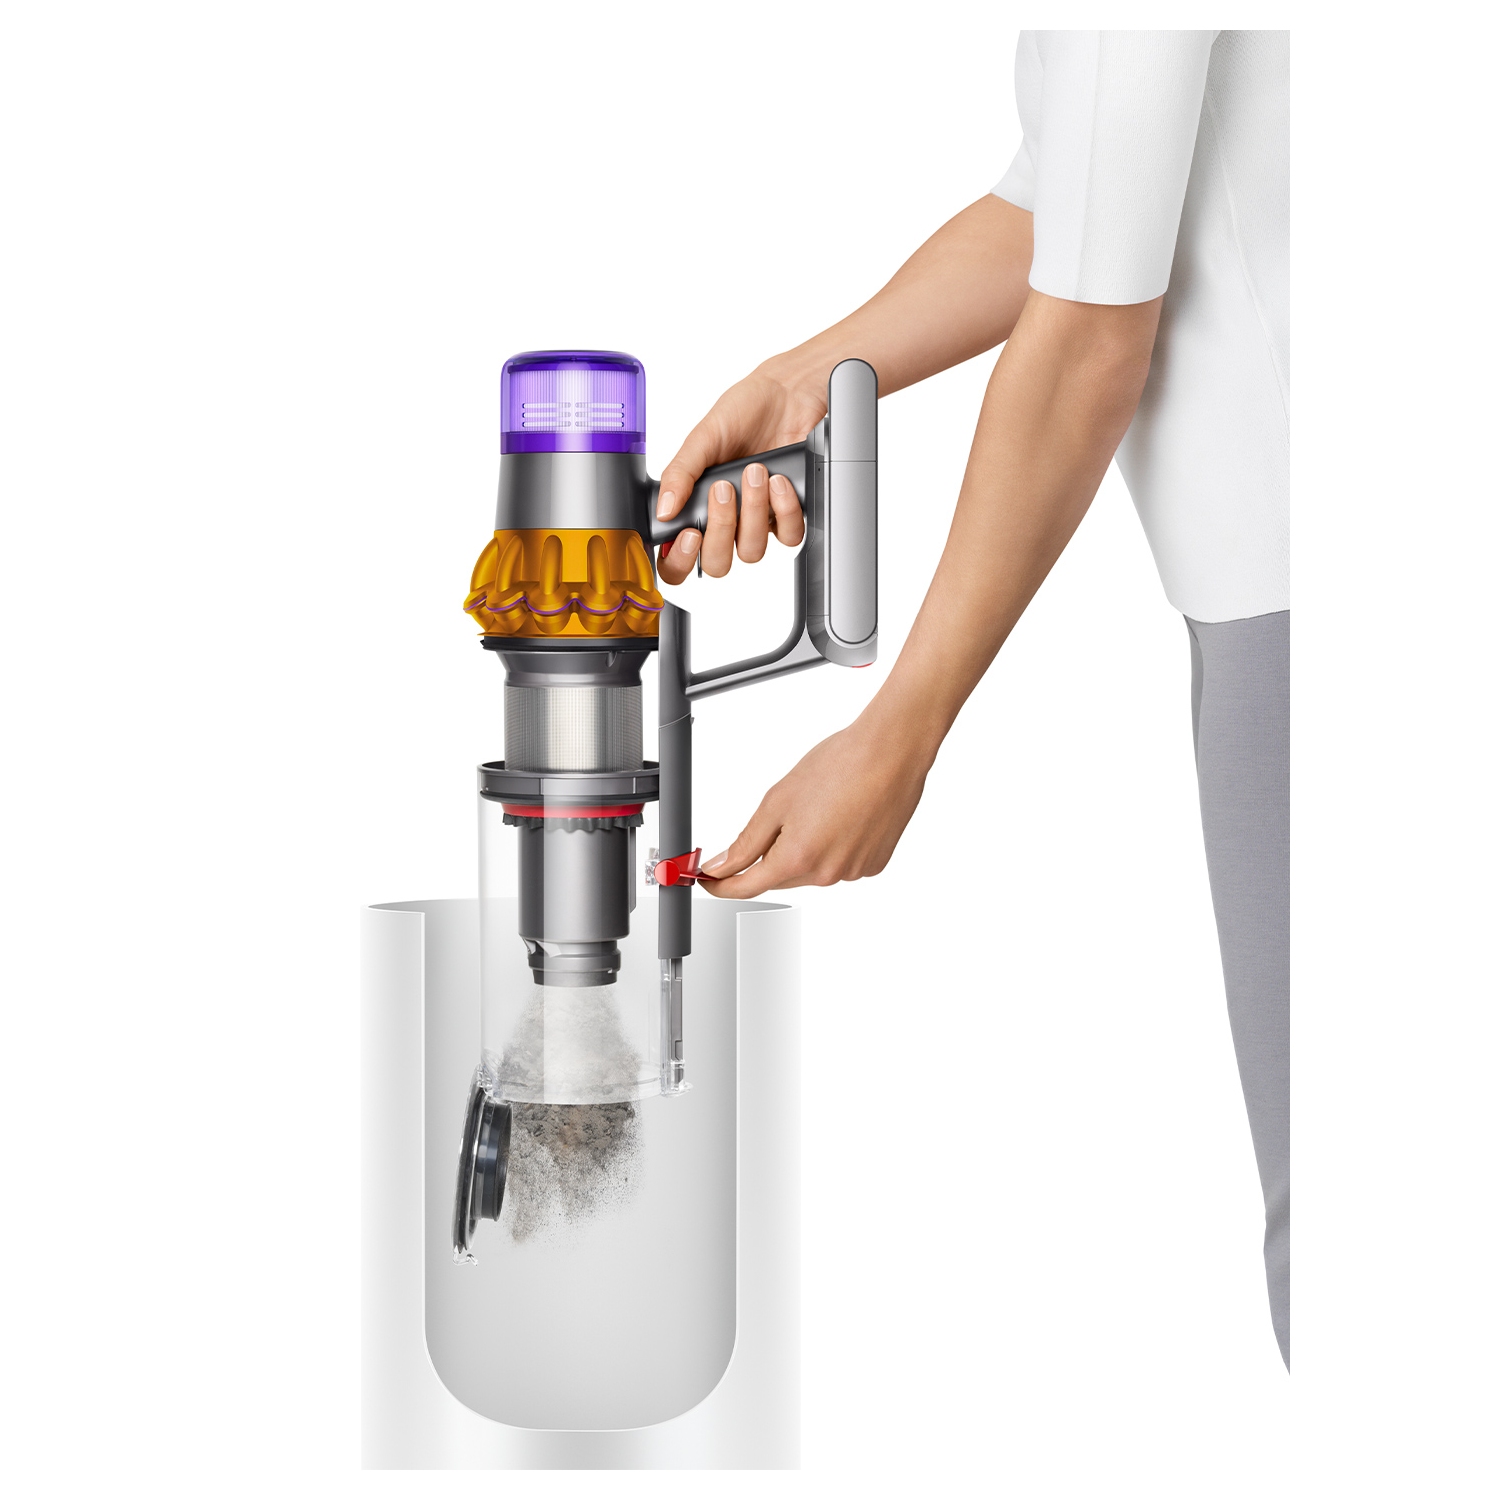 Dyson V15 Detect Absolute Cordless Stick Cleaner - 60 Minute Run Time - 2